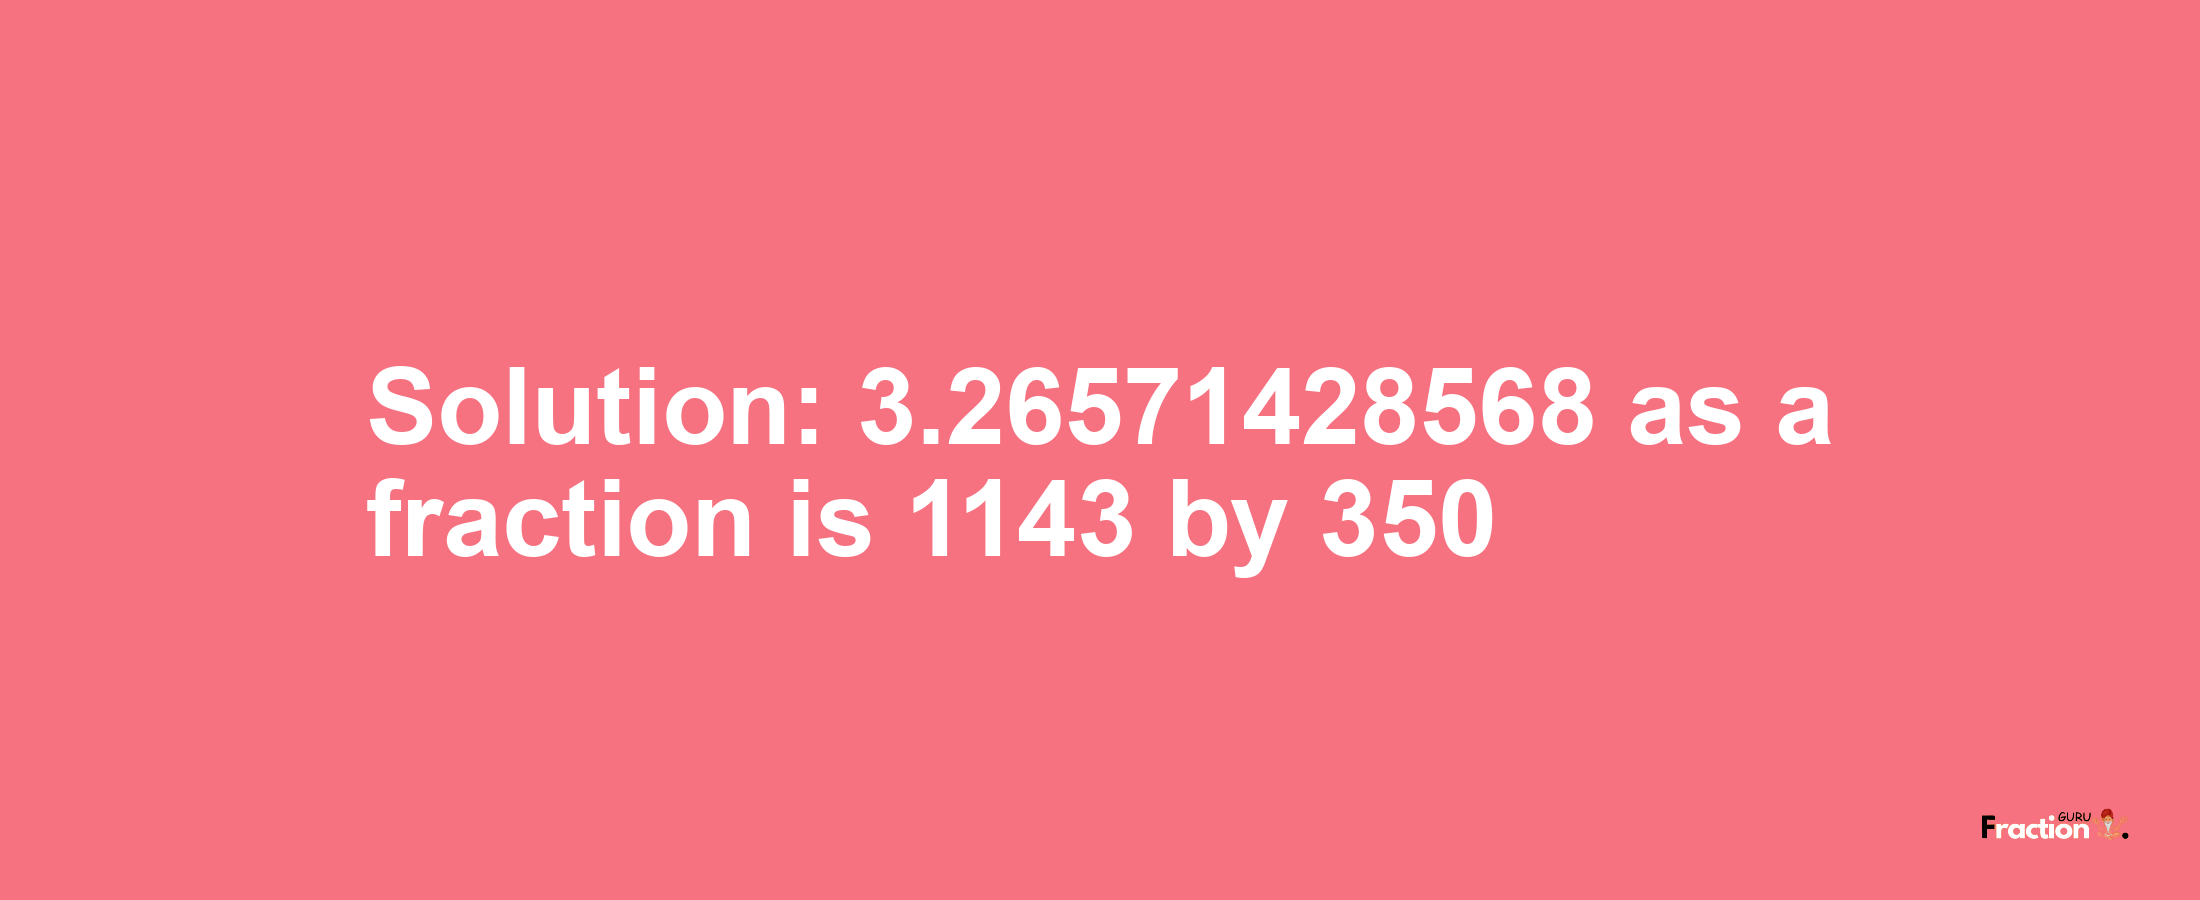 Solution:3.26571428568 as a fraction is 1143/350